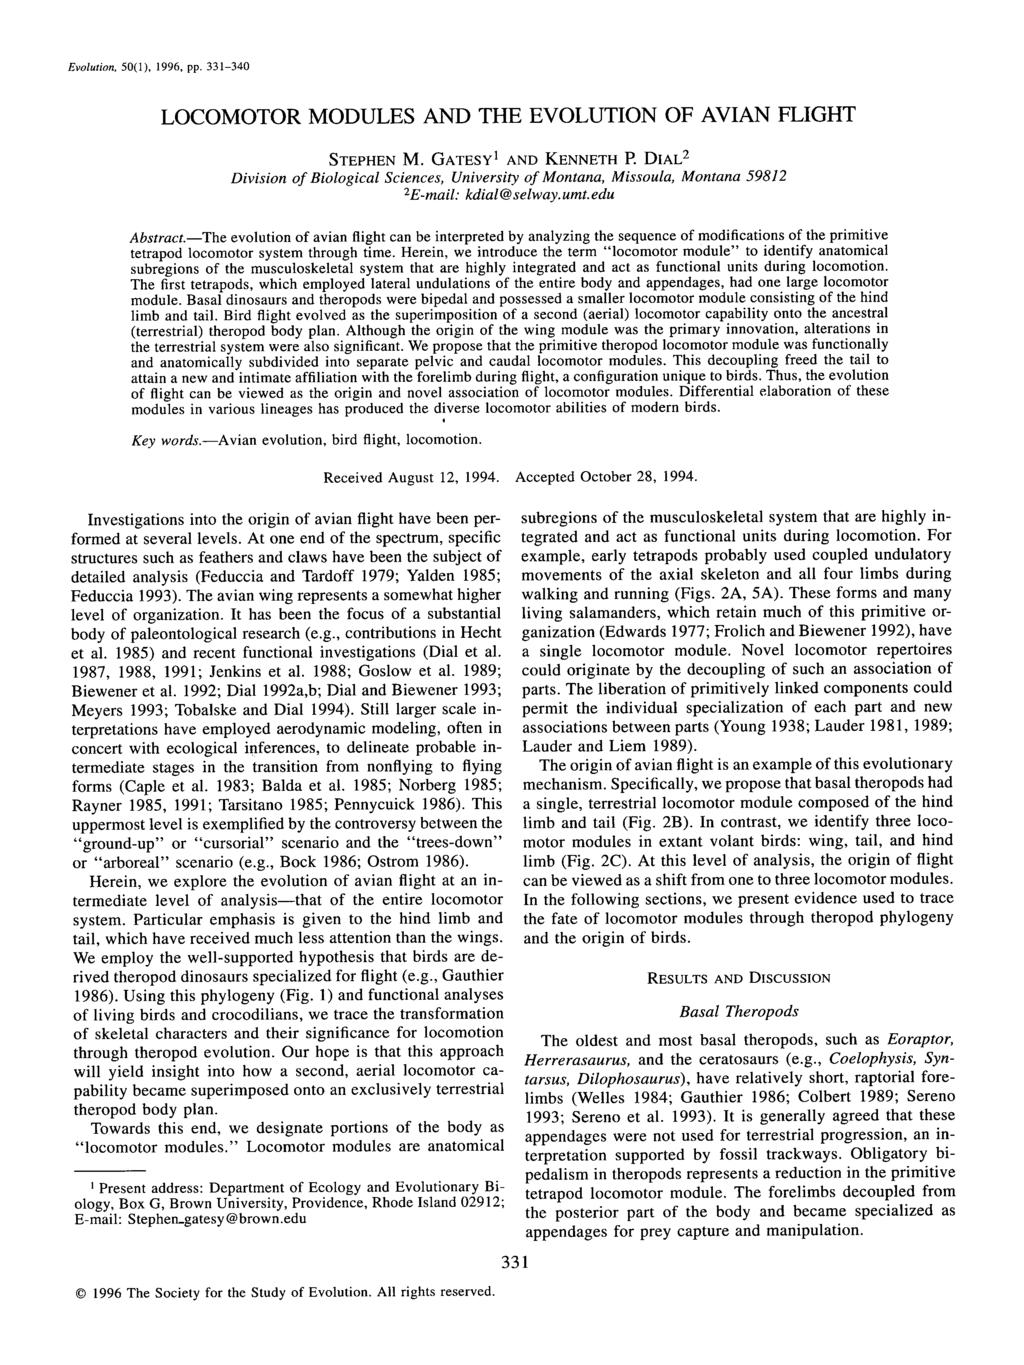 Evolution. 50(1), 1996, pp. 331-340 LOCOMOTOR MODULES AND THE EVOLUTION OF AVIAN FLIGHT STEPHEN M. GATESy i AND KENNETH P.